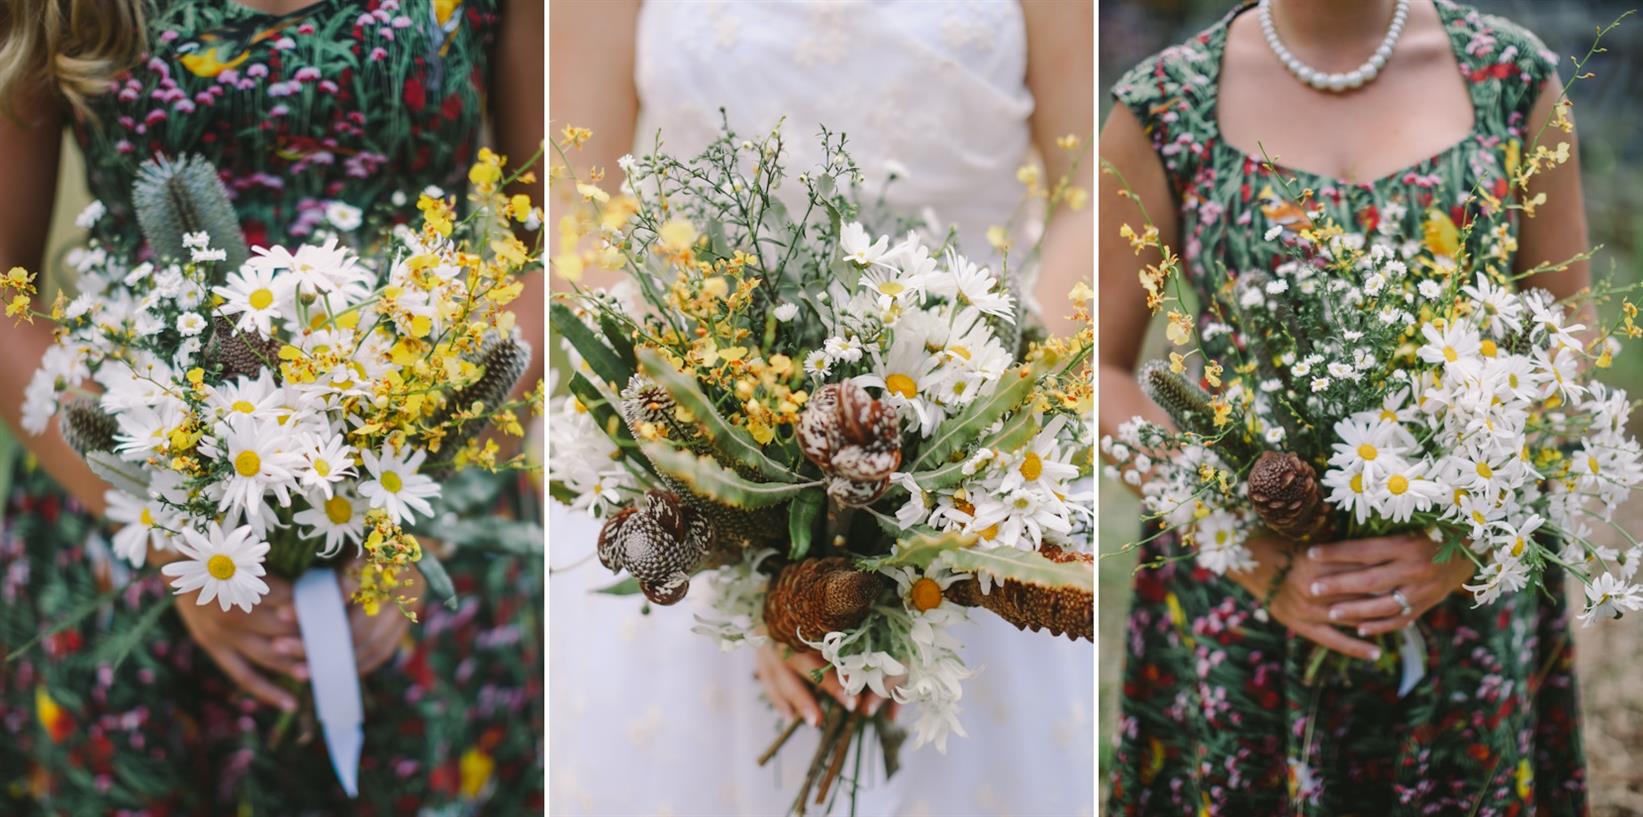 Rustic Bouquets - A 1950s Inspired Woodland Wedding